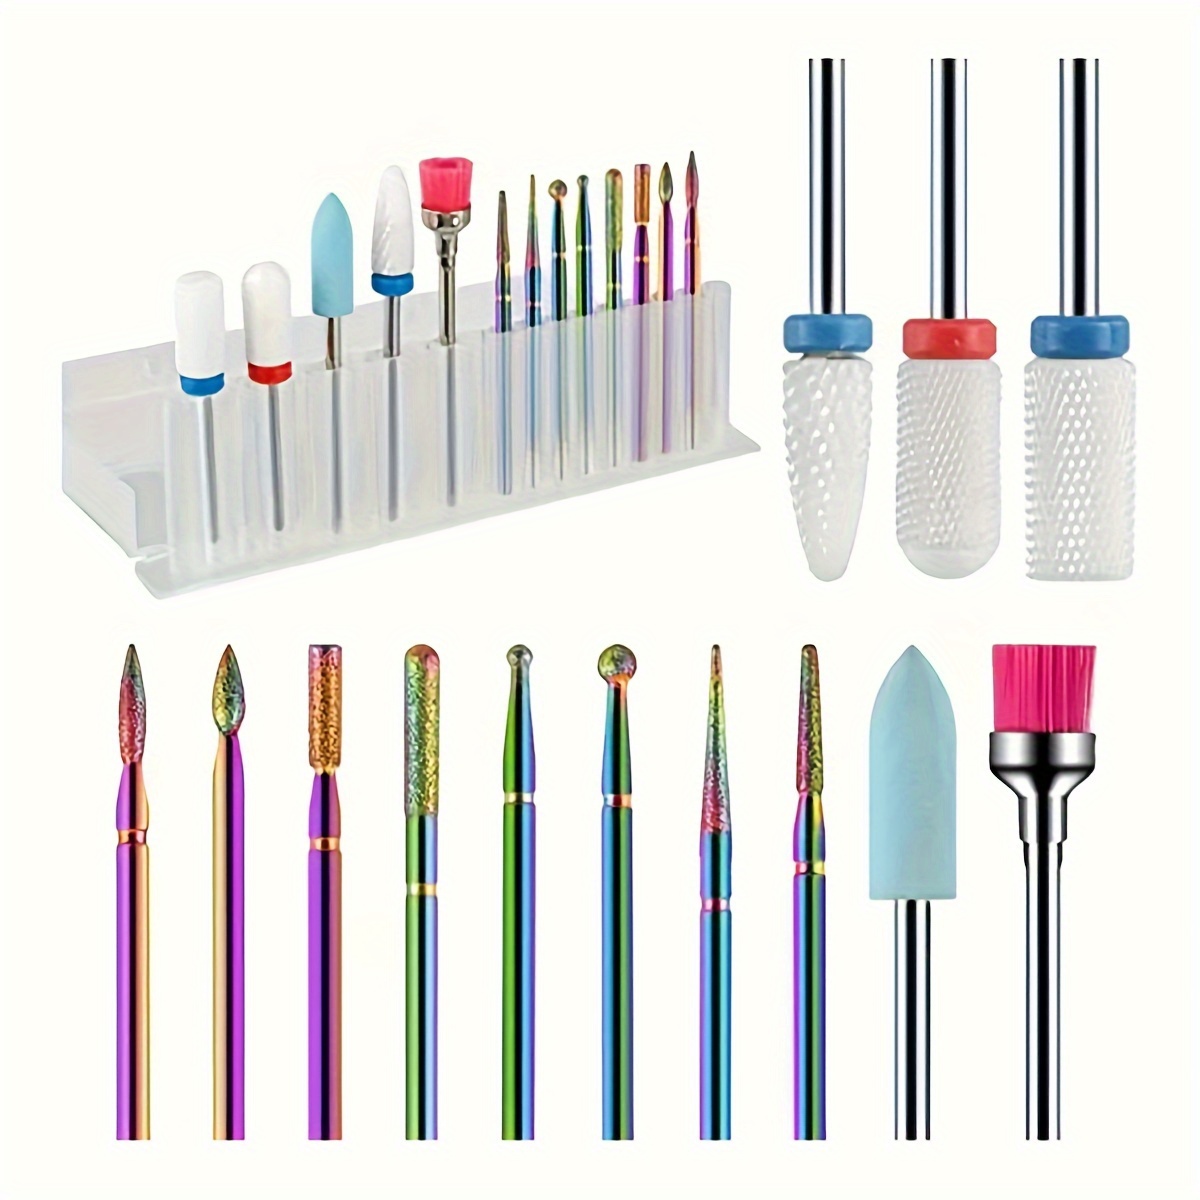 

Nail Drill Bits Set For Acrylic Nails, 3/32 Inch, Electric Nail File Kit With Ceramic Cuticle Removers & Gel Nail Art Tools, Professional Manicure & Pedicure Accessories